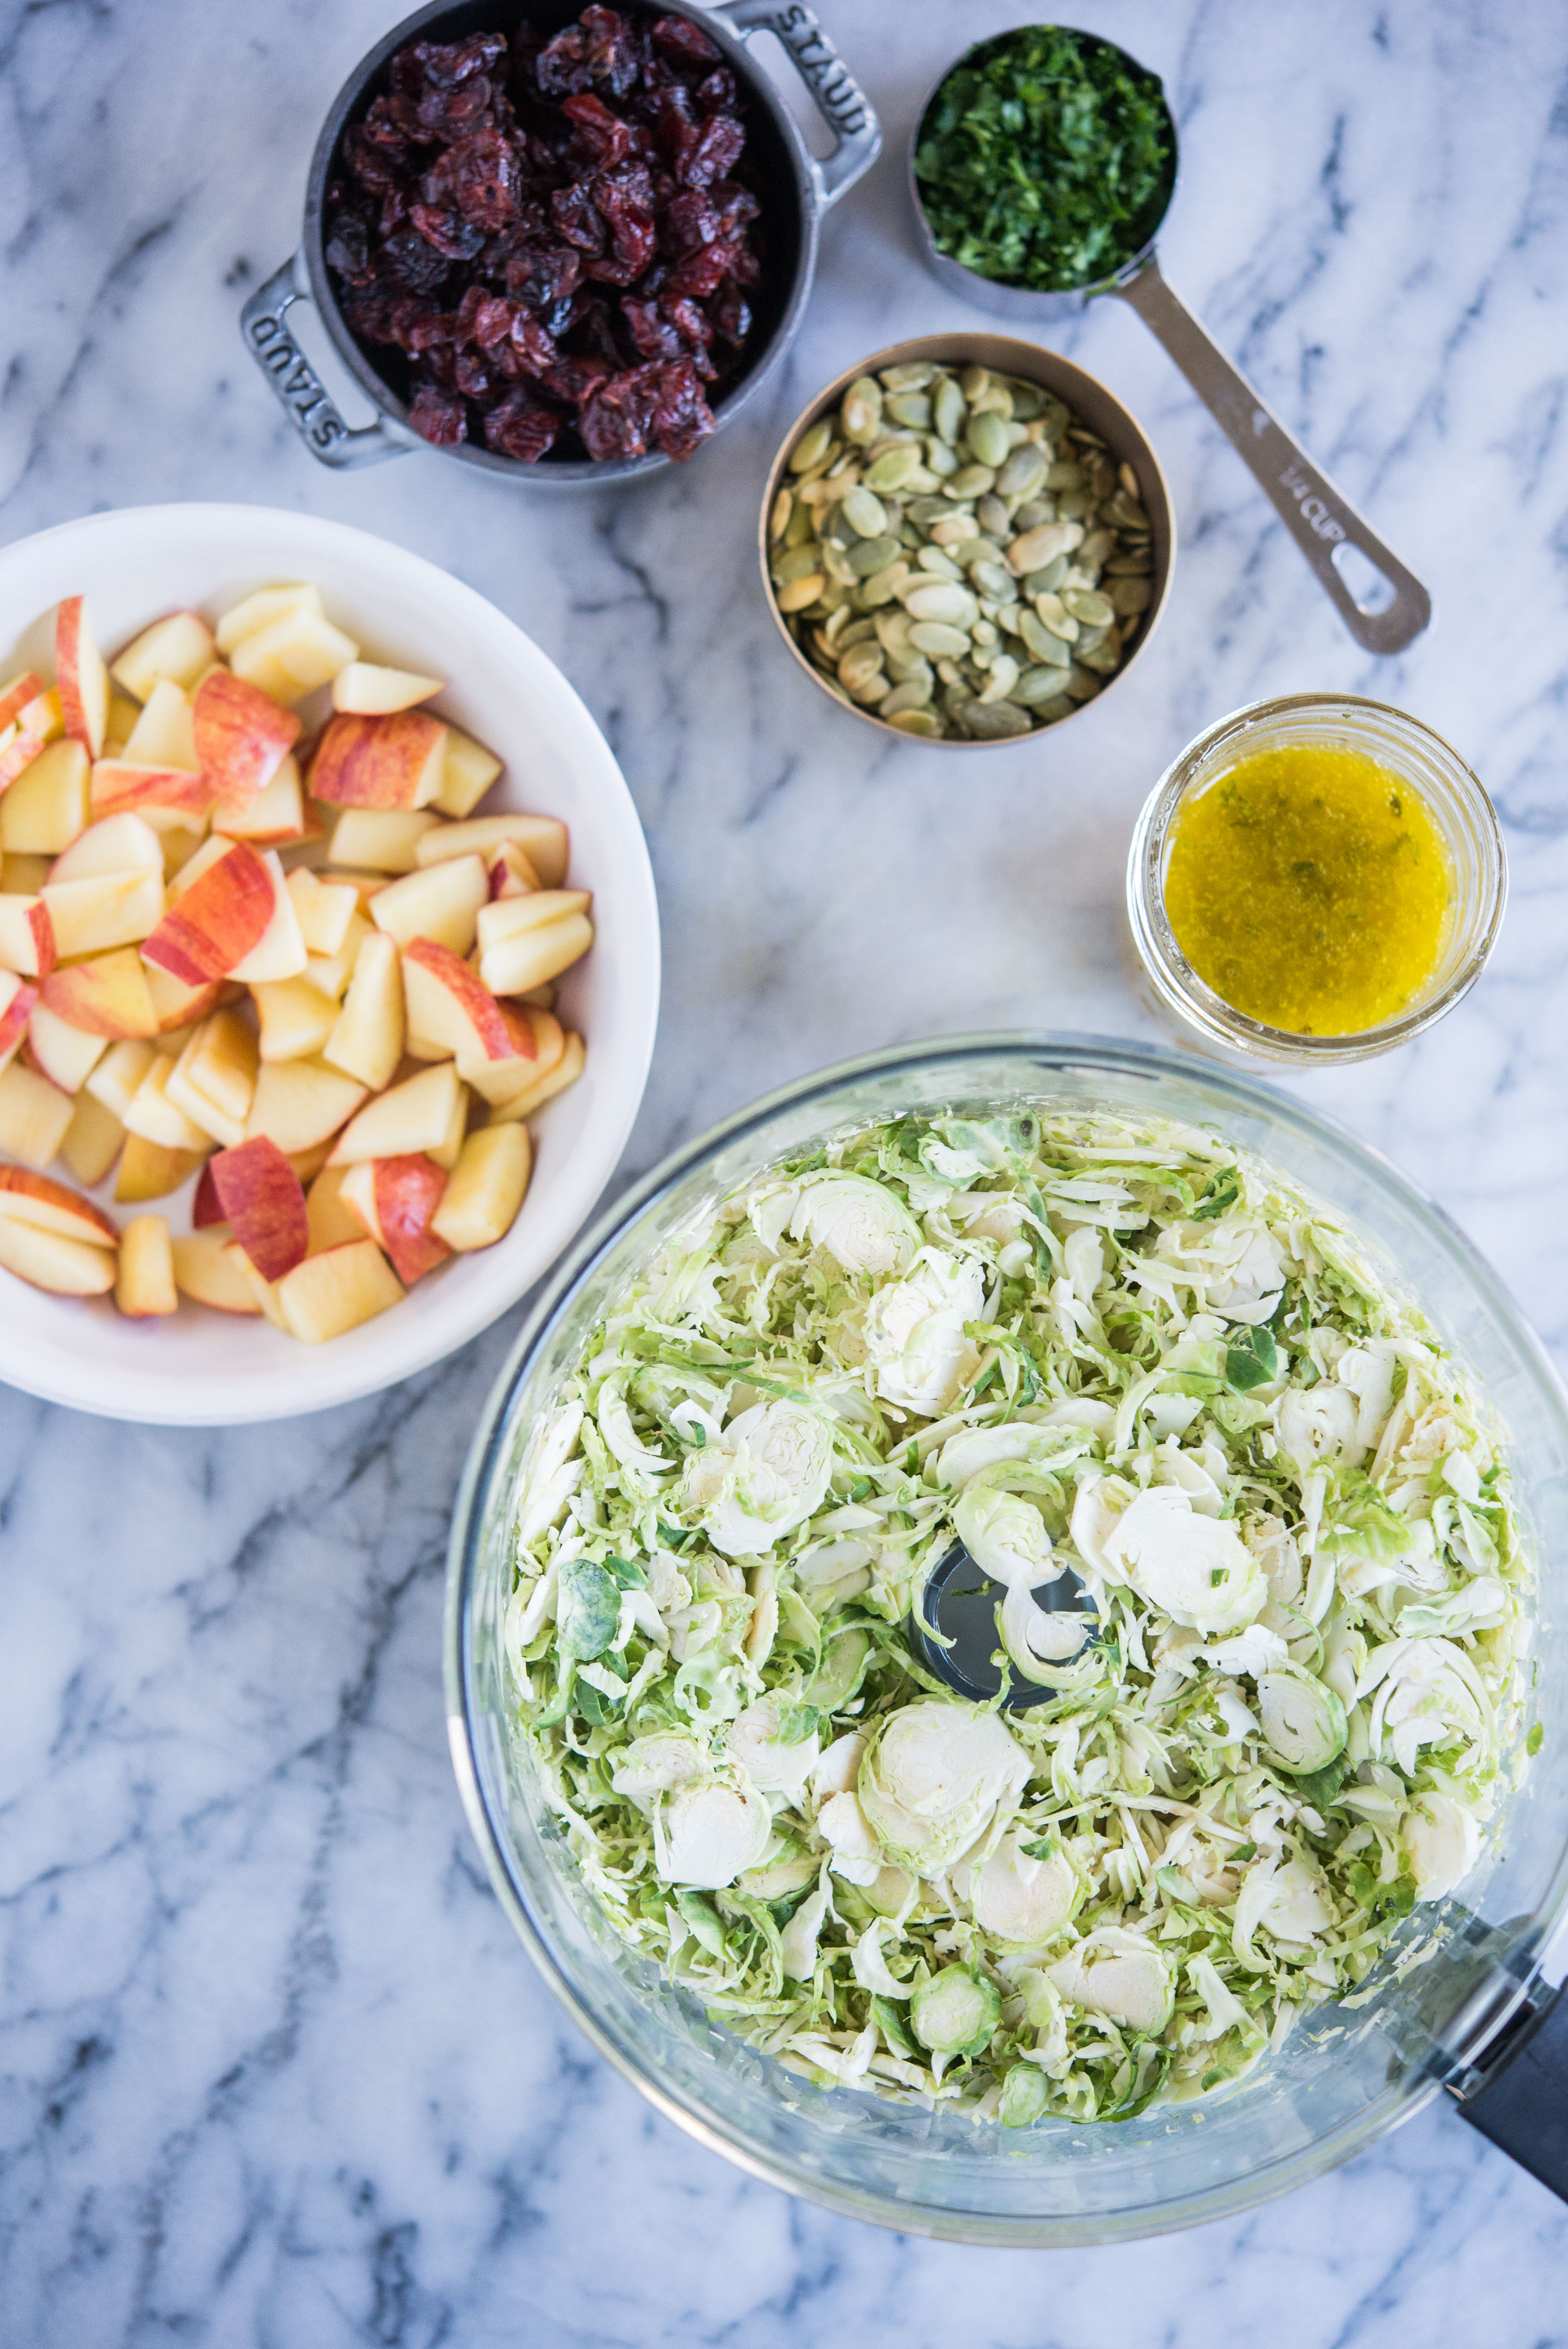 ingredients for shredded brussels sprouts salad - shredded brussels sprouts, diced apples, pumpkin seeds, dried cranberries, parsley, and apple cider vinaigrette in separate bowls on a marble surface